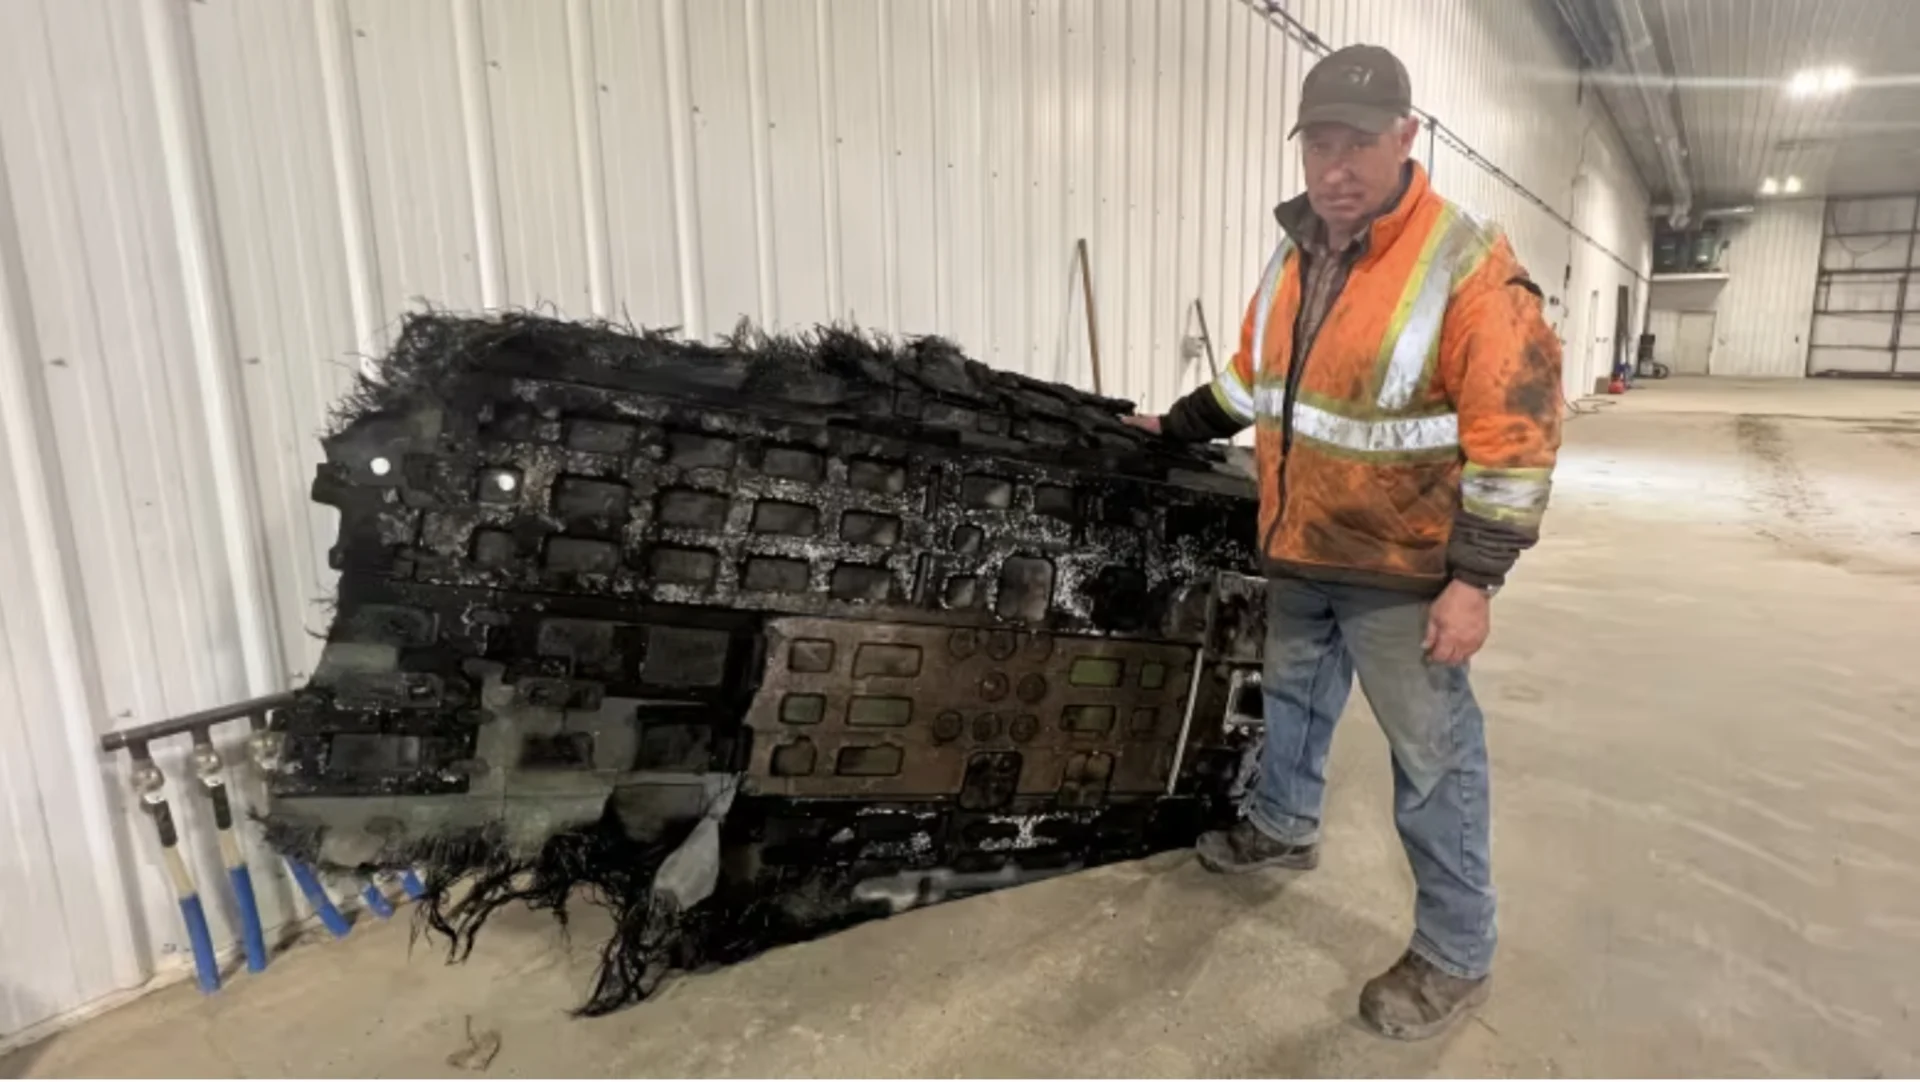 CBC: Saskatchewan farmer Barry Sawchuk recently discovered this 40-kilogram piece of space debris on his land. He plans to sell it to raise money for his local hockey rink. (Adam Bent/CBC)